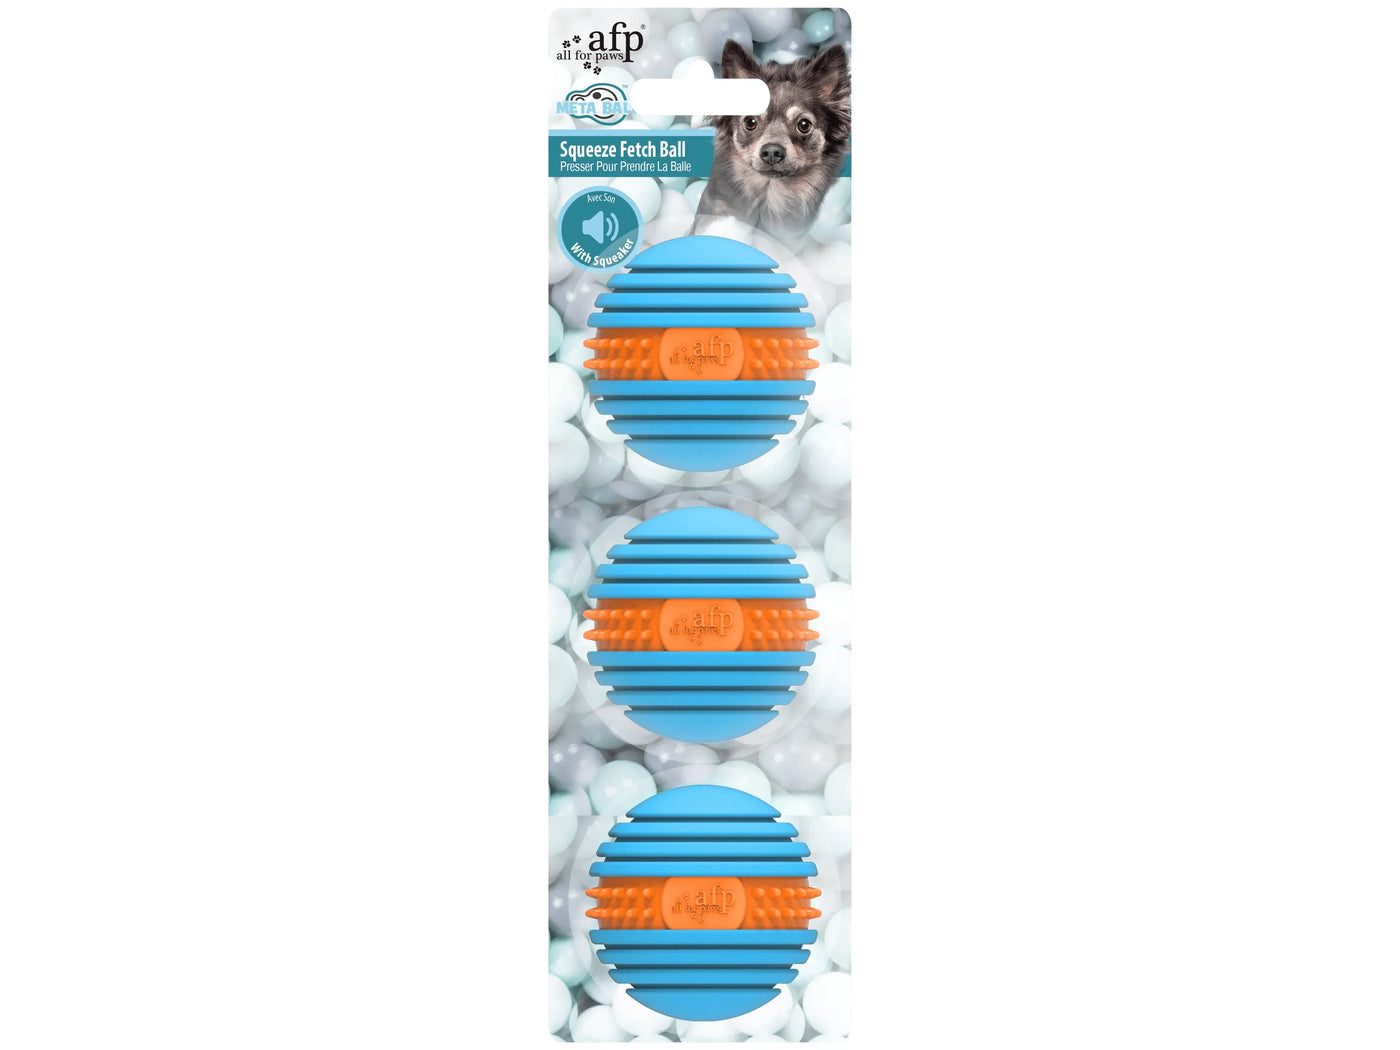 AFP Meta Ball - Squeeze fetch ball 3 pack